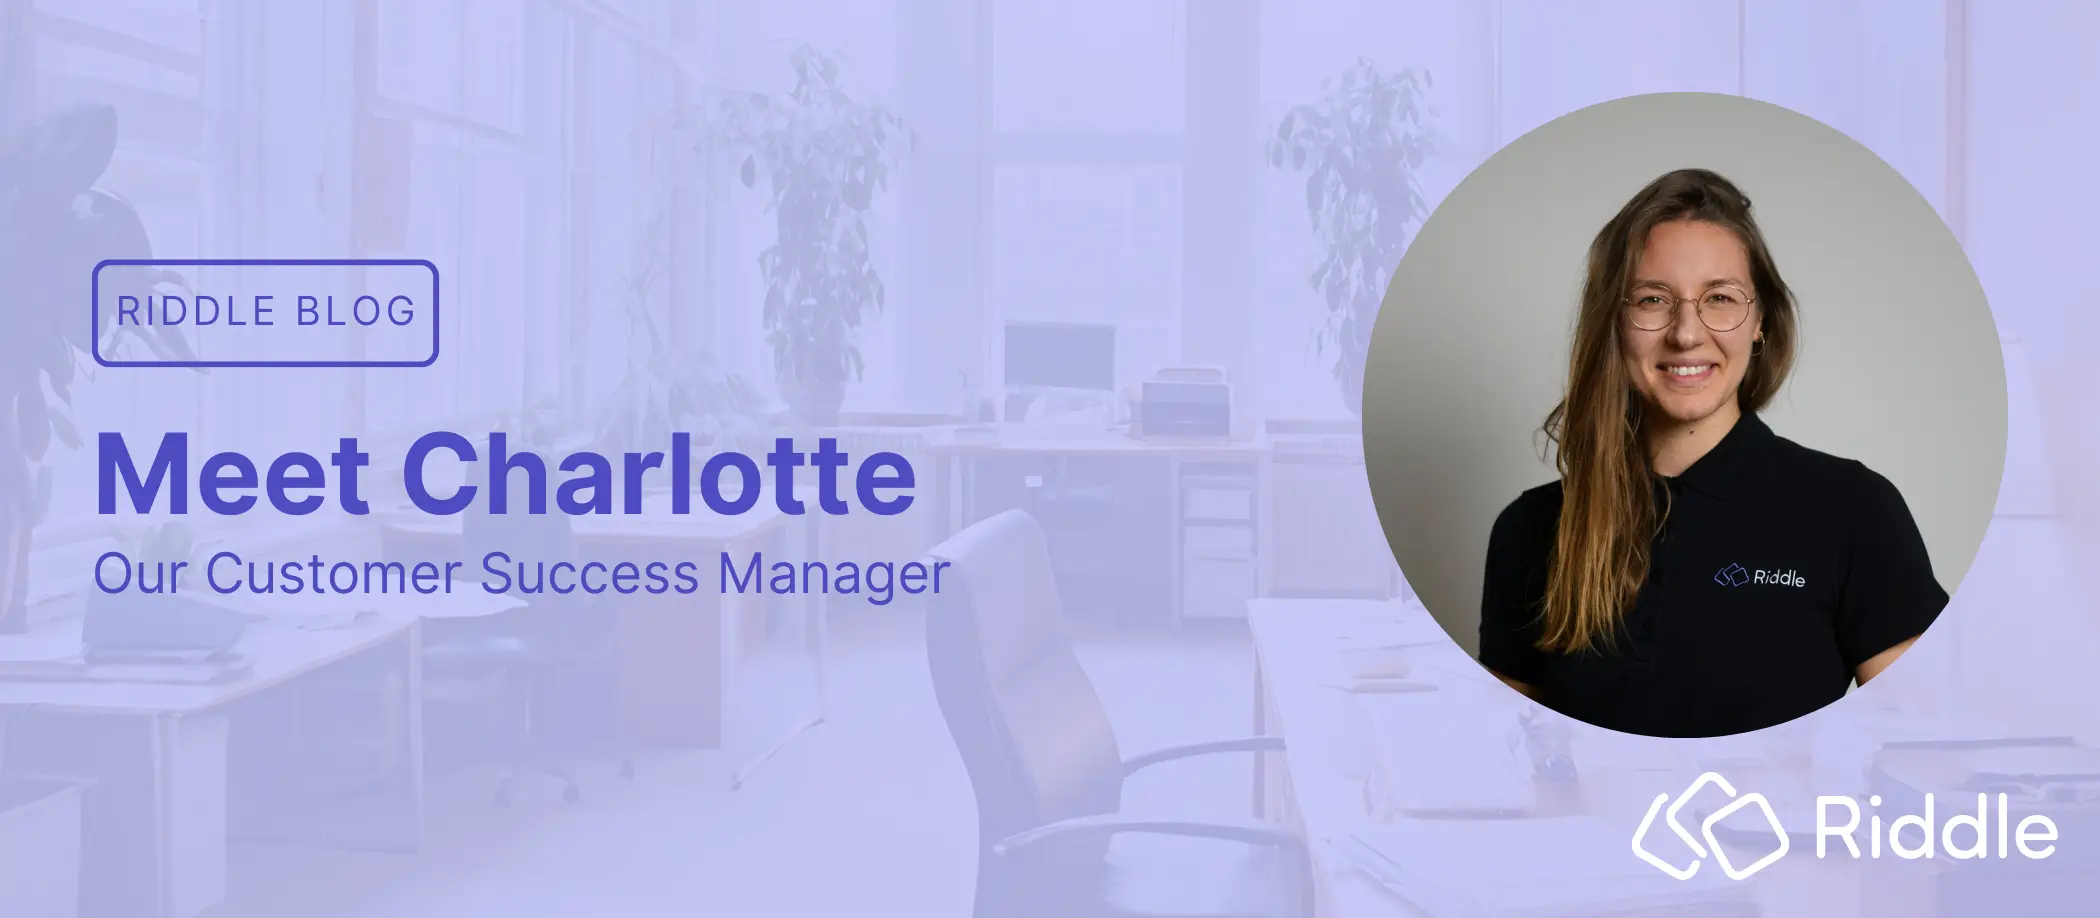 Blog Header for the series "Meet Riddle". The image includes to titel "Meet Charlotte: Our Customer Success Manager" as well as a picture of the team member.